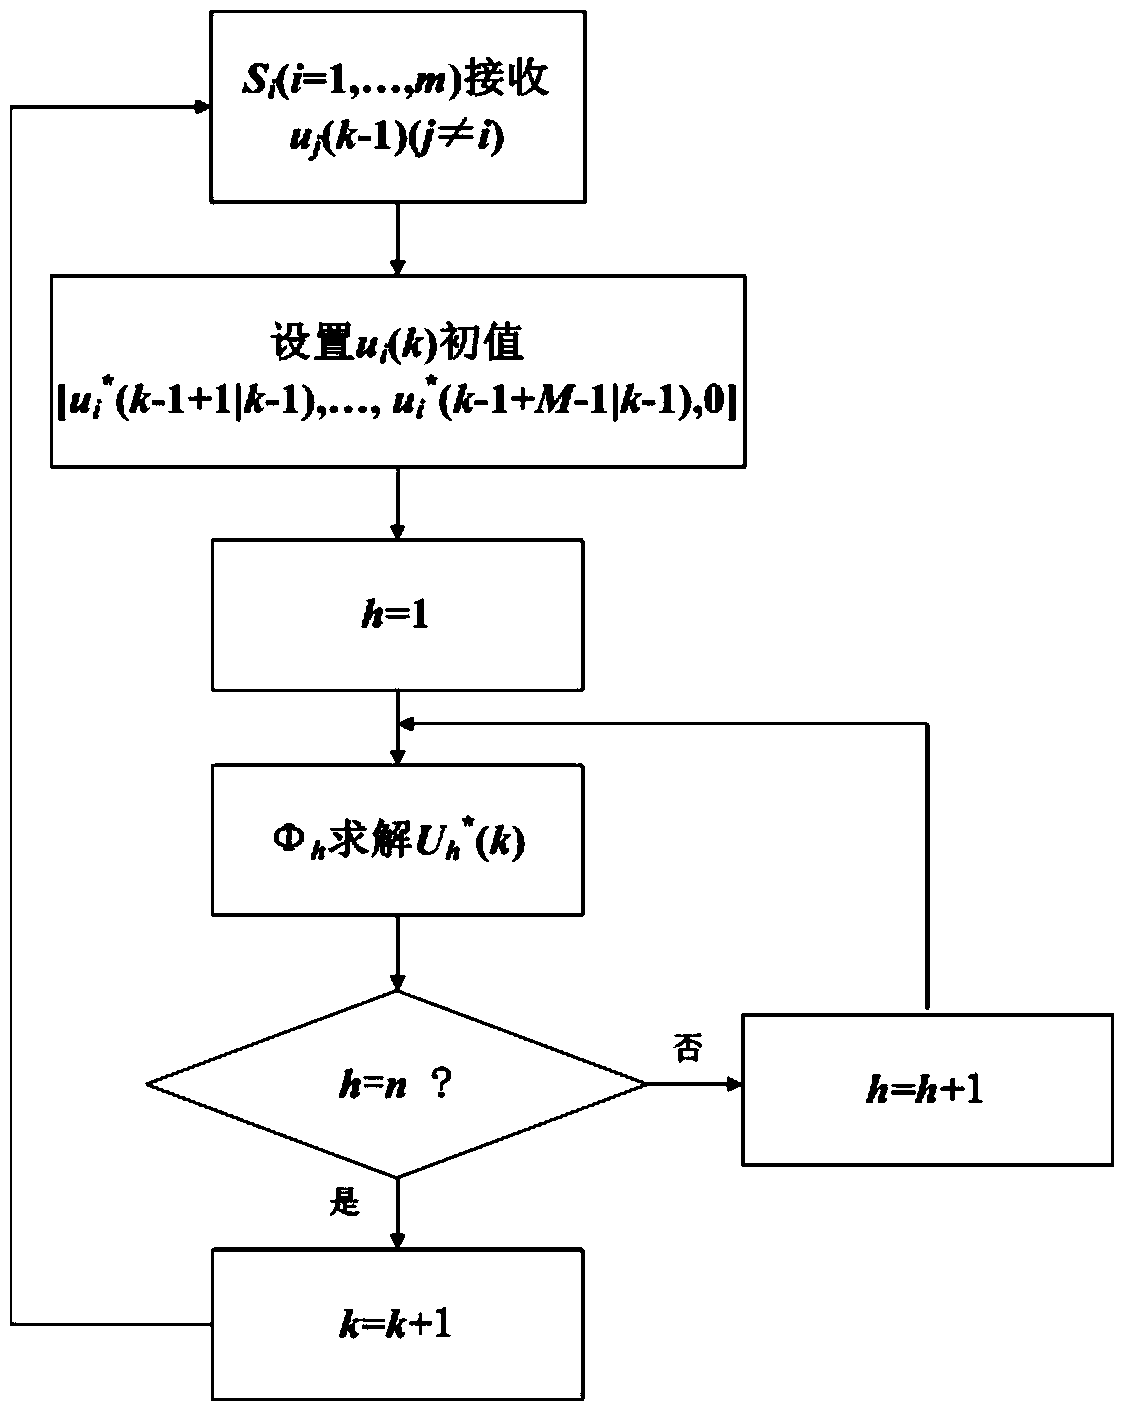 A Distributed Model Predictive Control Method Based on Hierarchical Decomposition